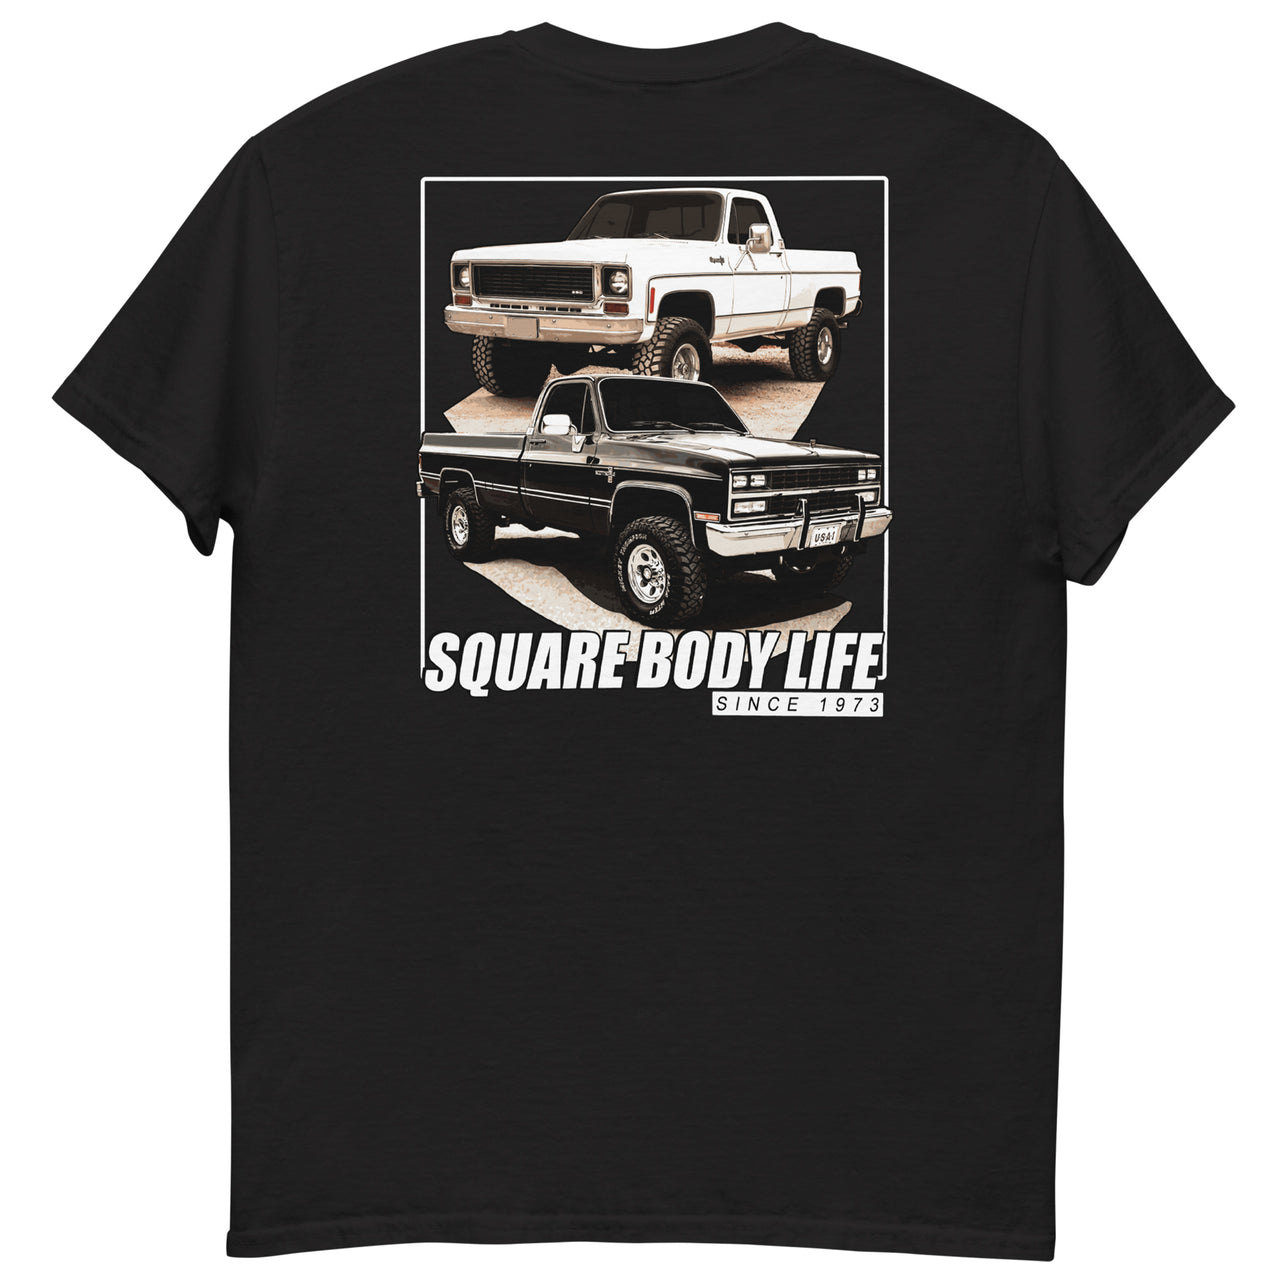 Square Body Life T-Shirt in black back view